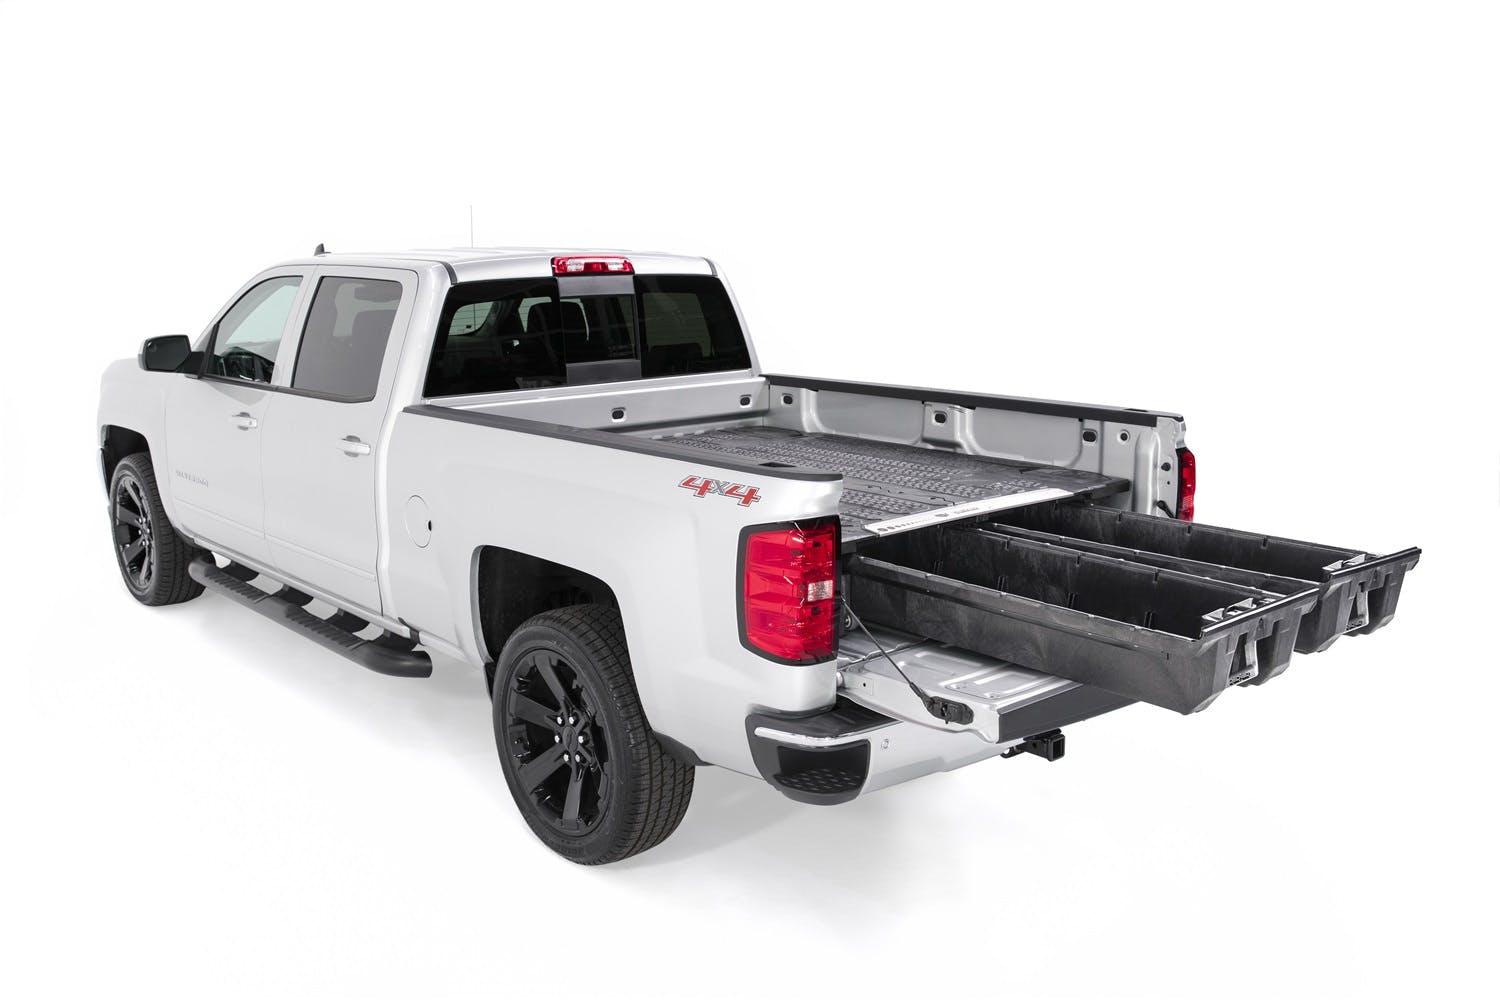 DECKED DG3 64.54 Two Drawer Storage System for A Full Size Pick Up Truck